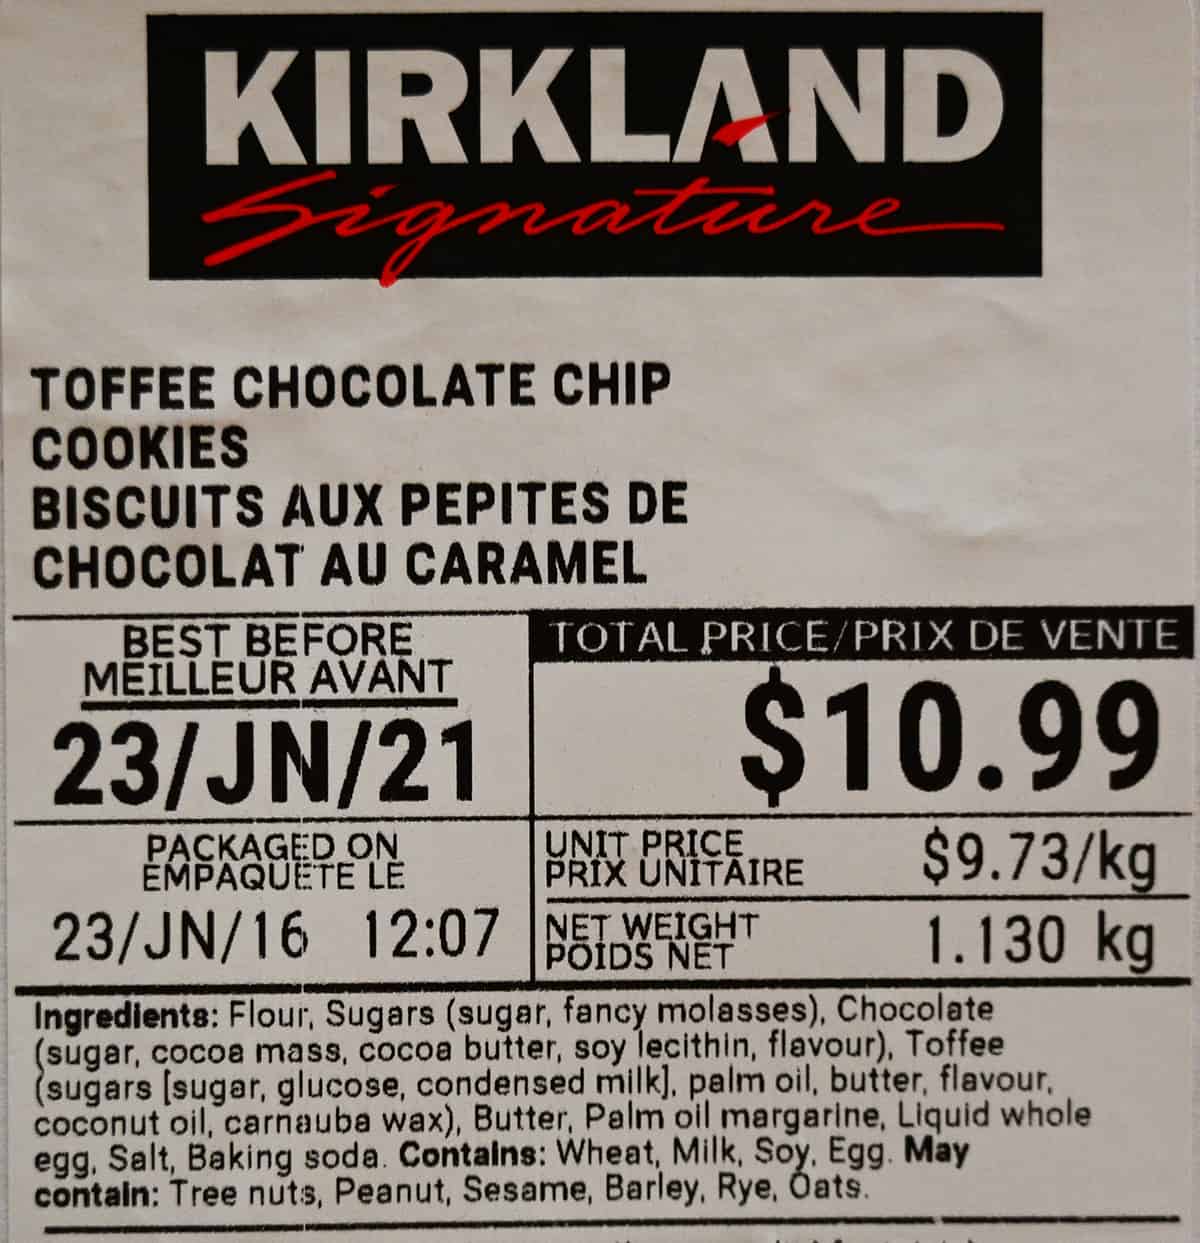 Closeup image of the front label of the cookies showing the best before date and cost.